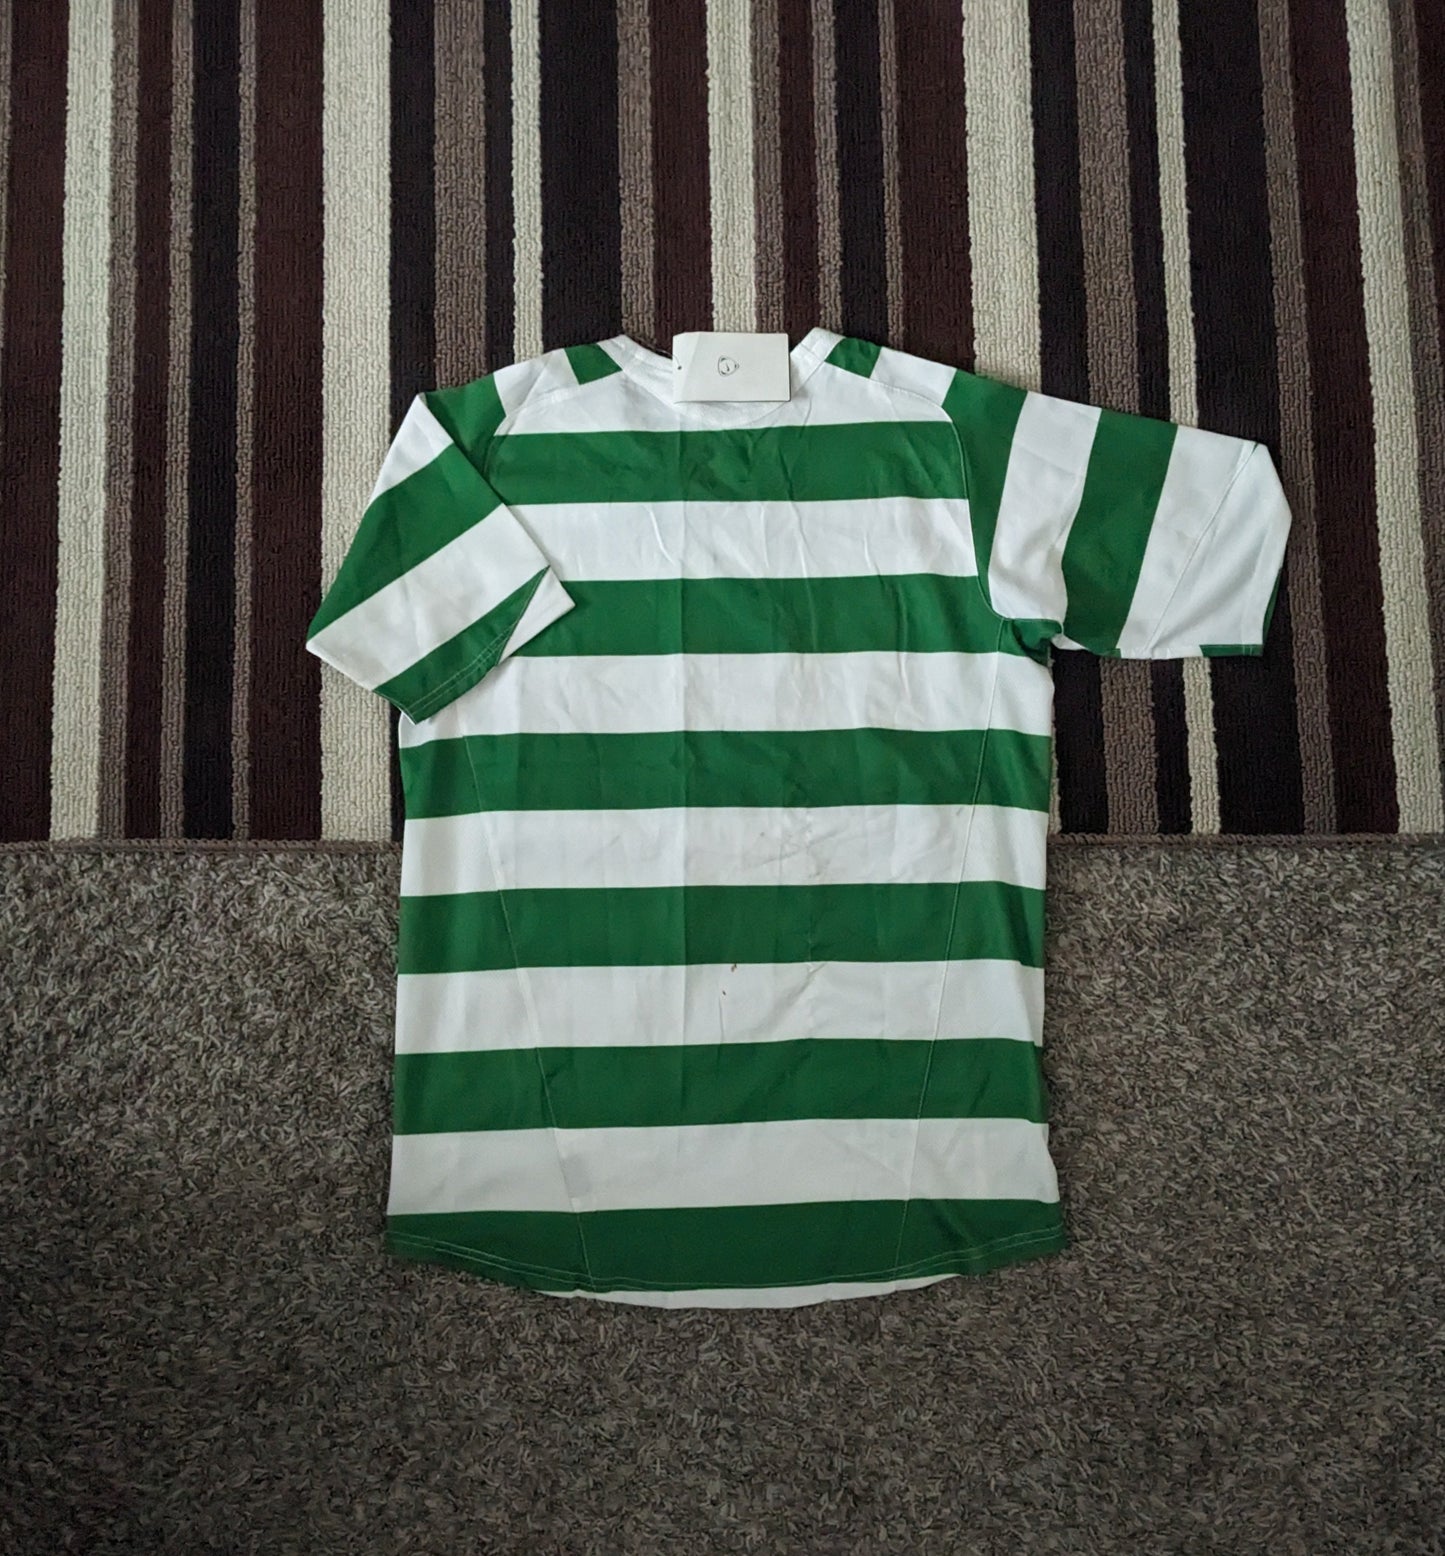 Celtic Scotland home (YOUTH XL) *Brand new with tags